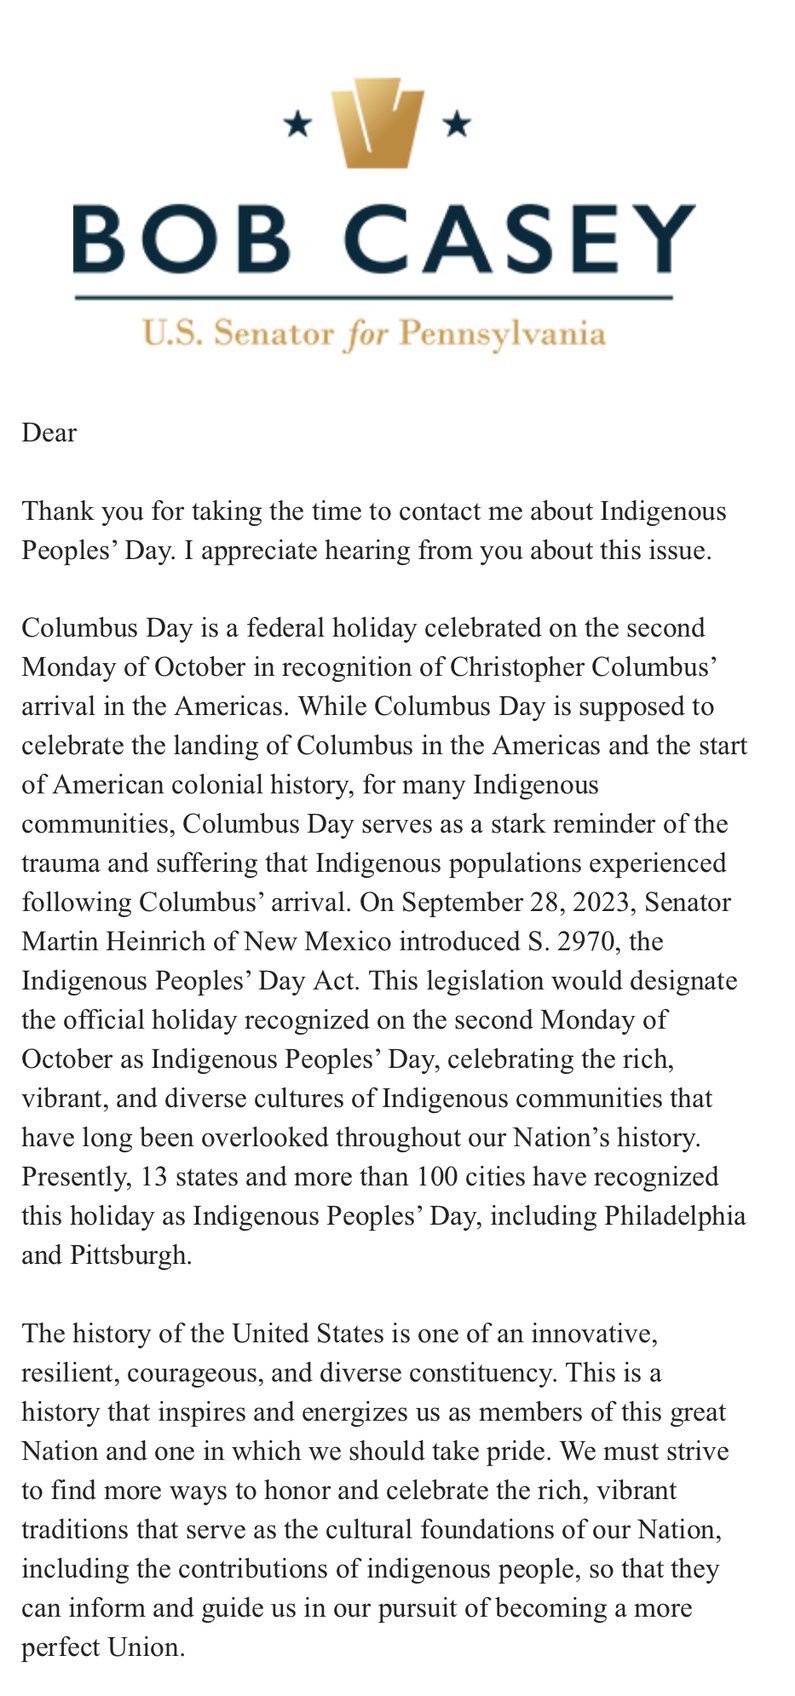 exclusive democrat bob casey expressed openness for ditching columbus day for indigenous peoples day in constituent letter